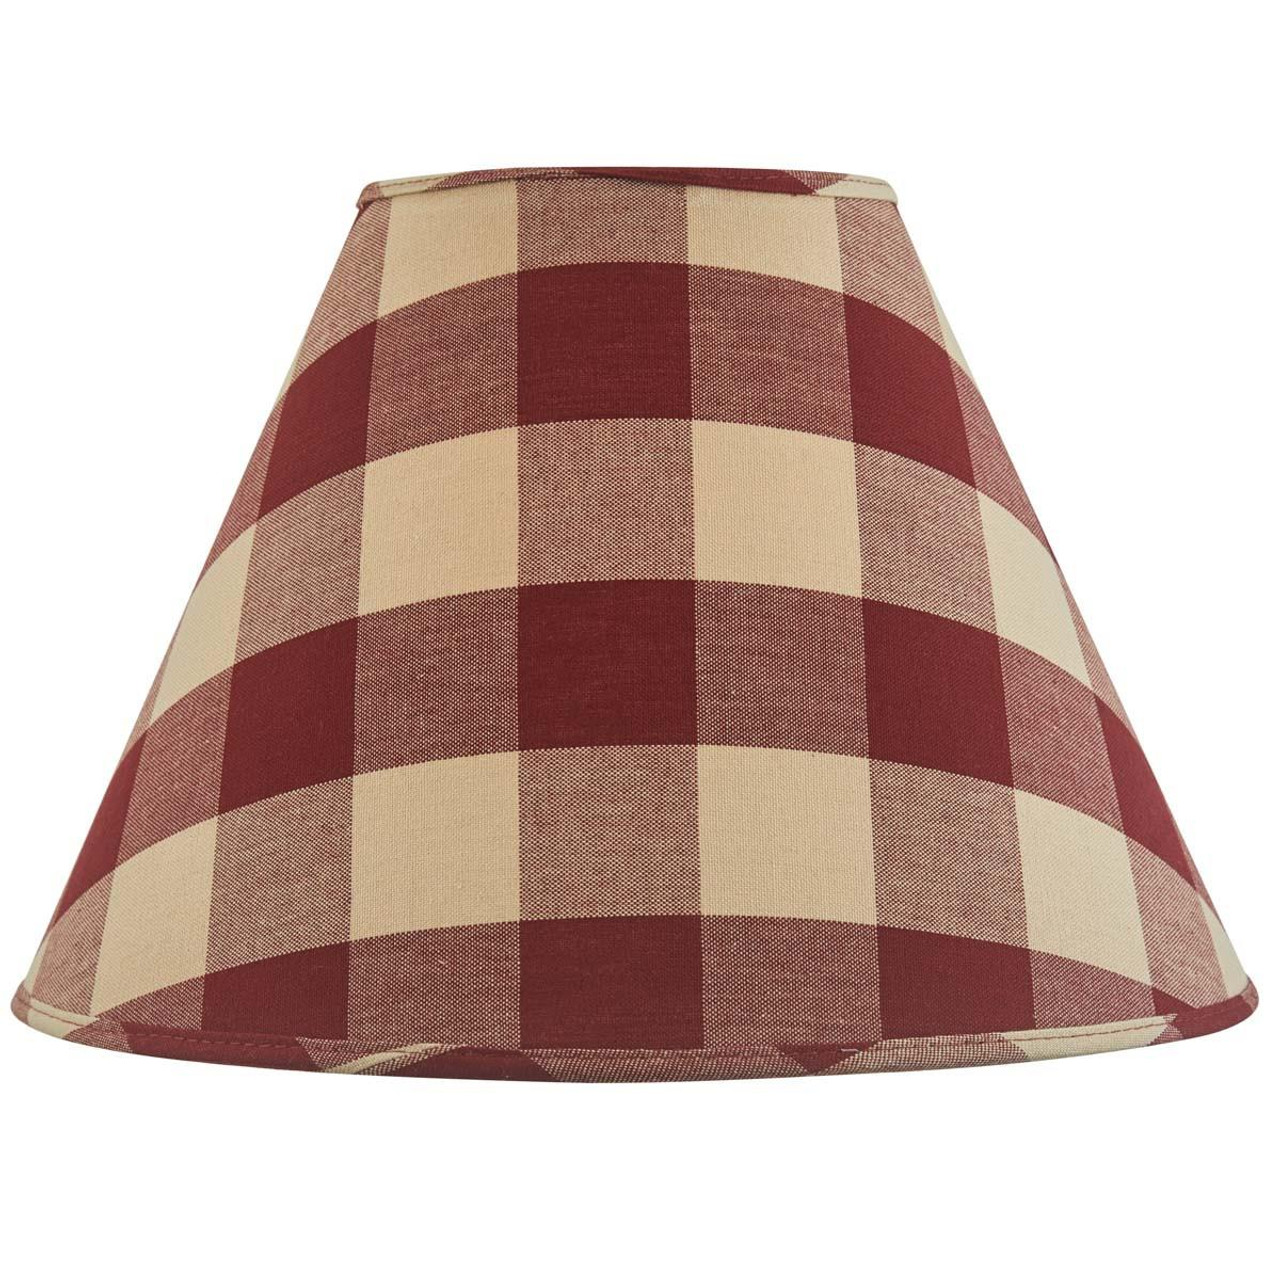 https://cdn11.bigcommerce.com/s-tfdhmk/images/stencil/1280x1280/products/19508/123889/Wicklow-Check-Lampshades-Garnet-762242022157_image1__94407.1634892896.jpg?c=2